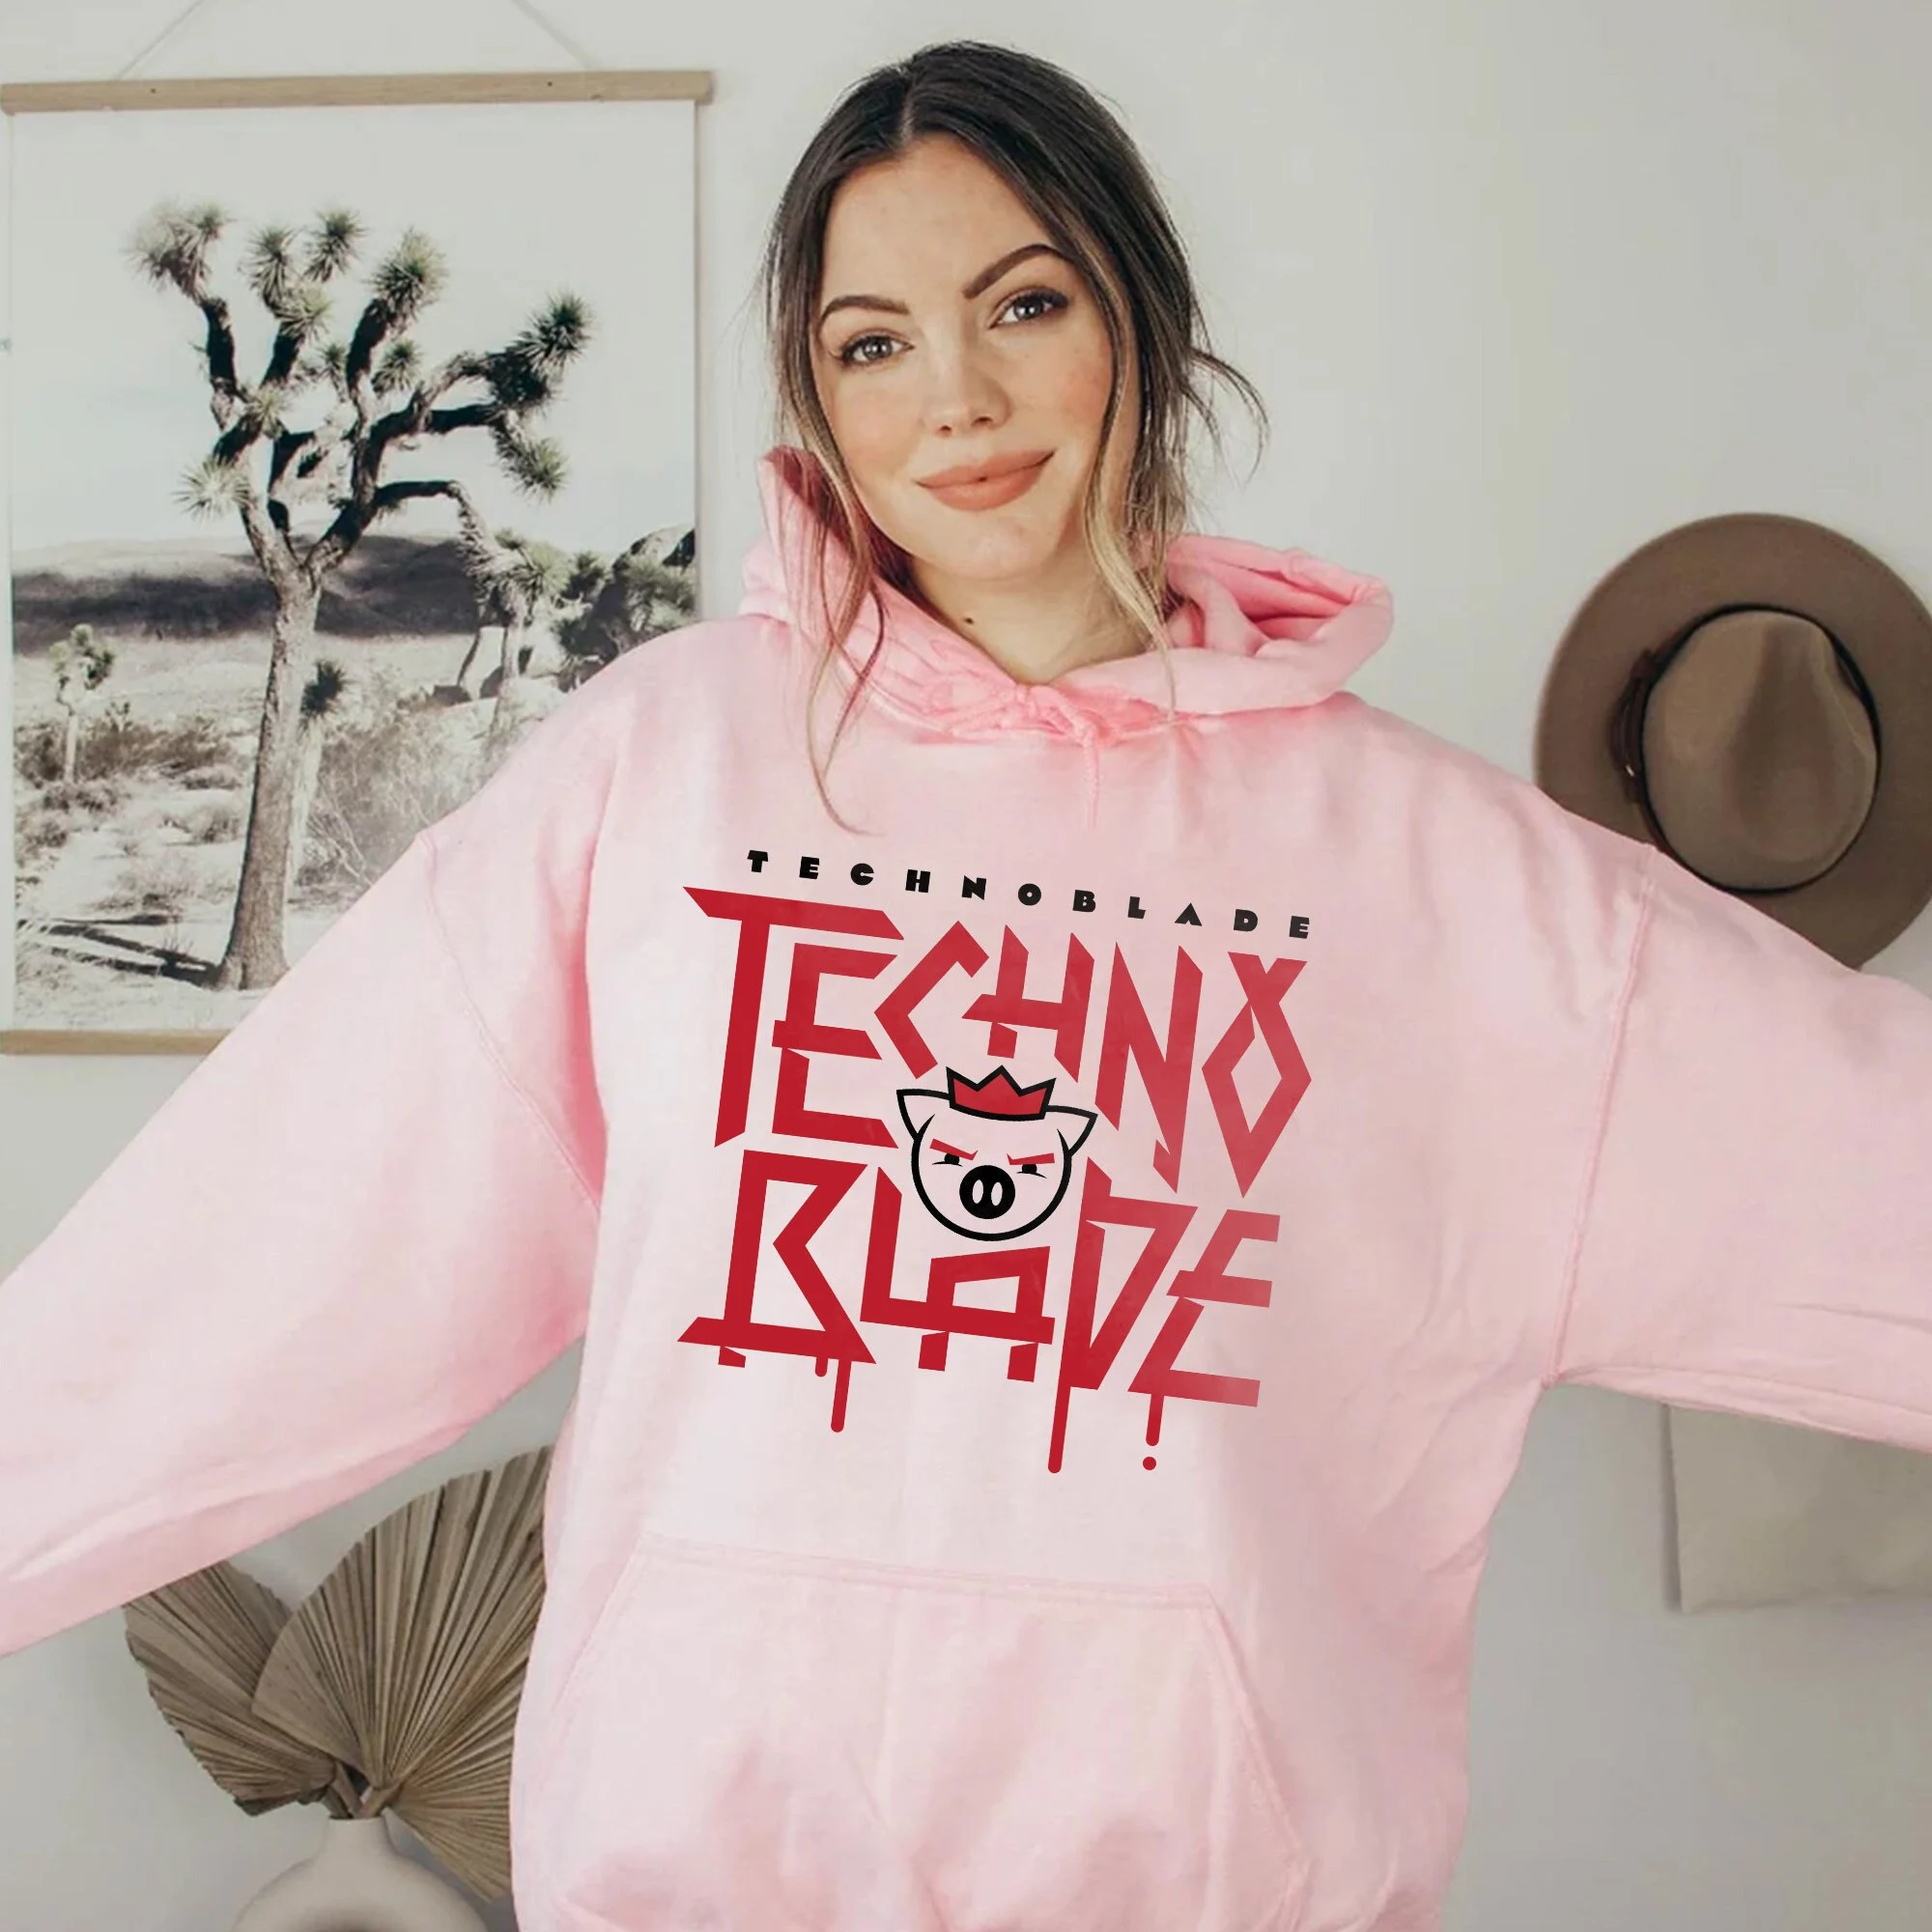 Technoblade Never Die Hoodie, So Long NERDS ,Rest In Peace Technoblade, Technoblade  Hoodie, Technoblade T-Shirt, Technoblade Fan Shirt. - YMdecor Home Store